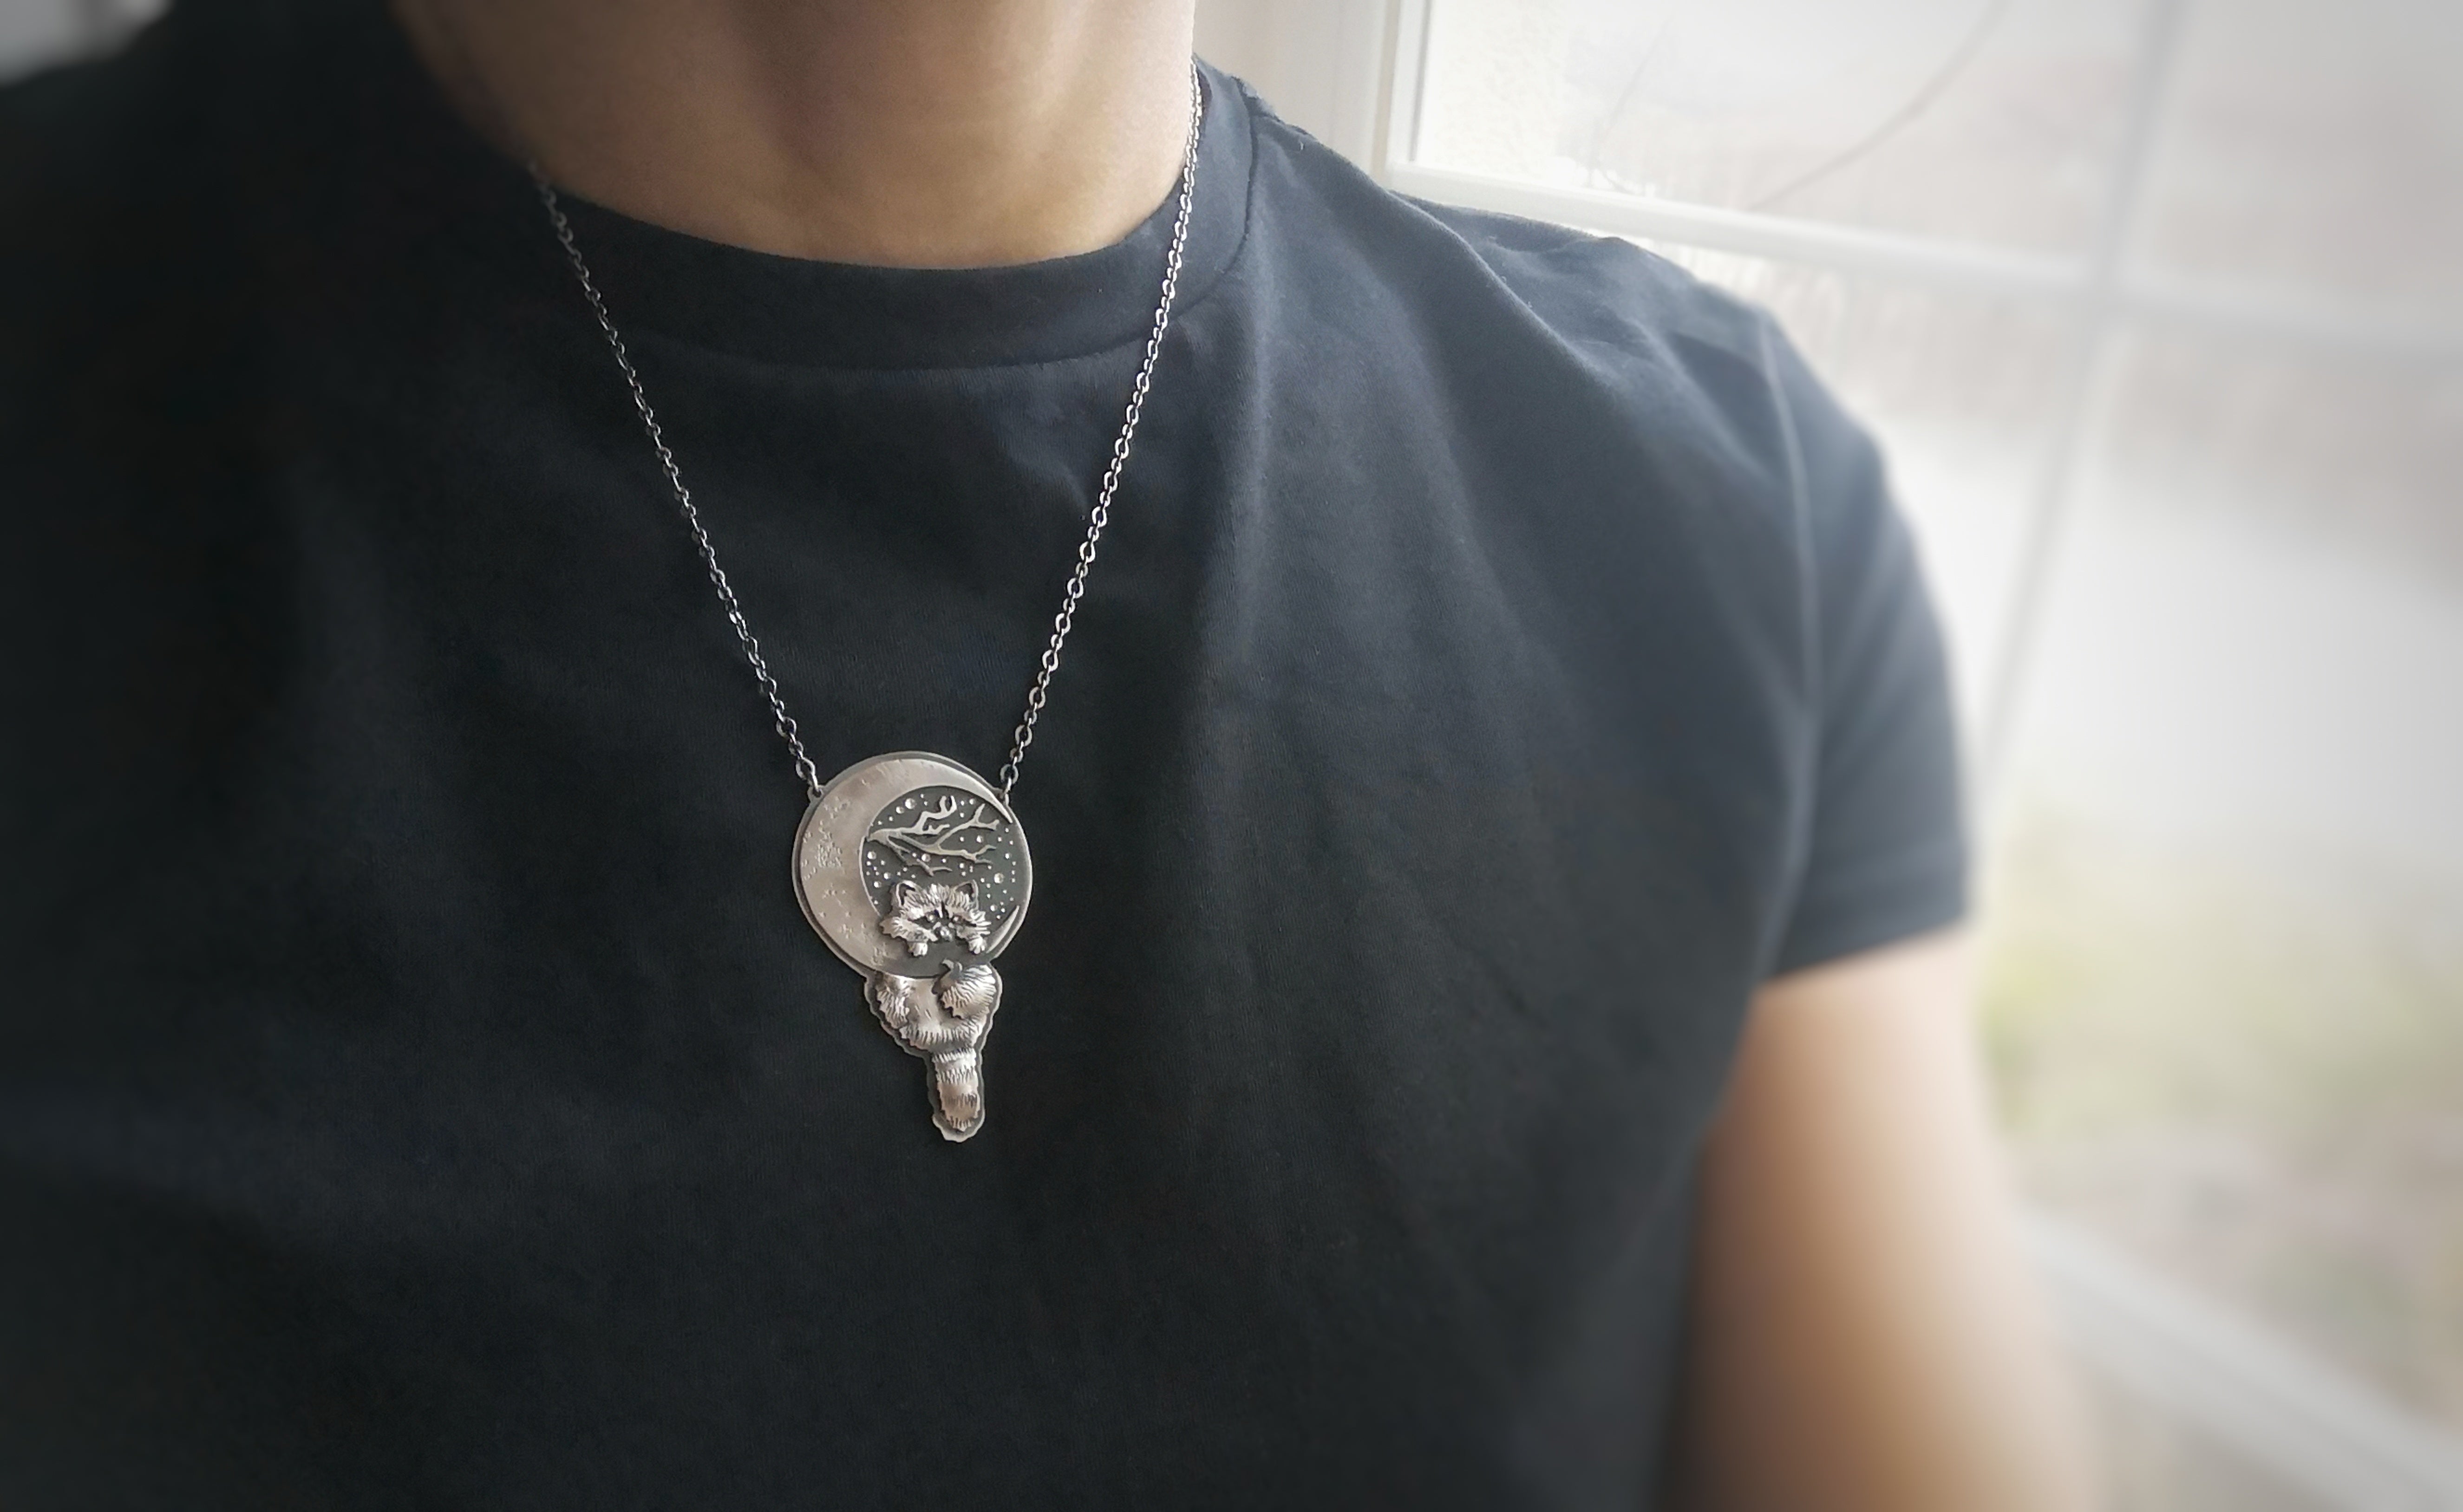 The Raccoon on the Moon Necklace